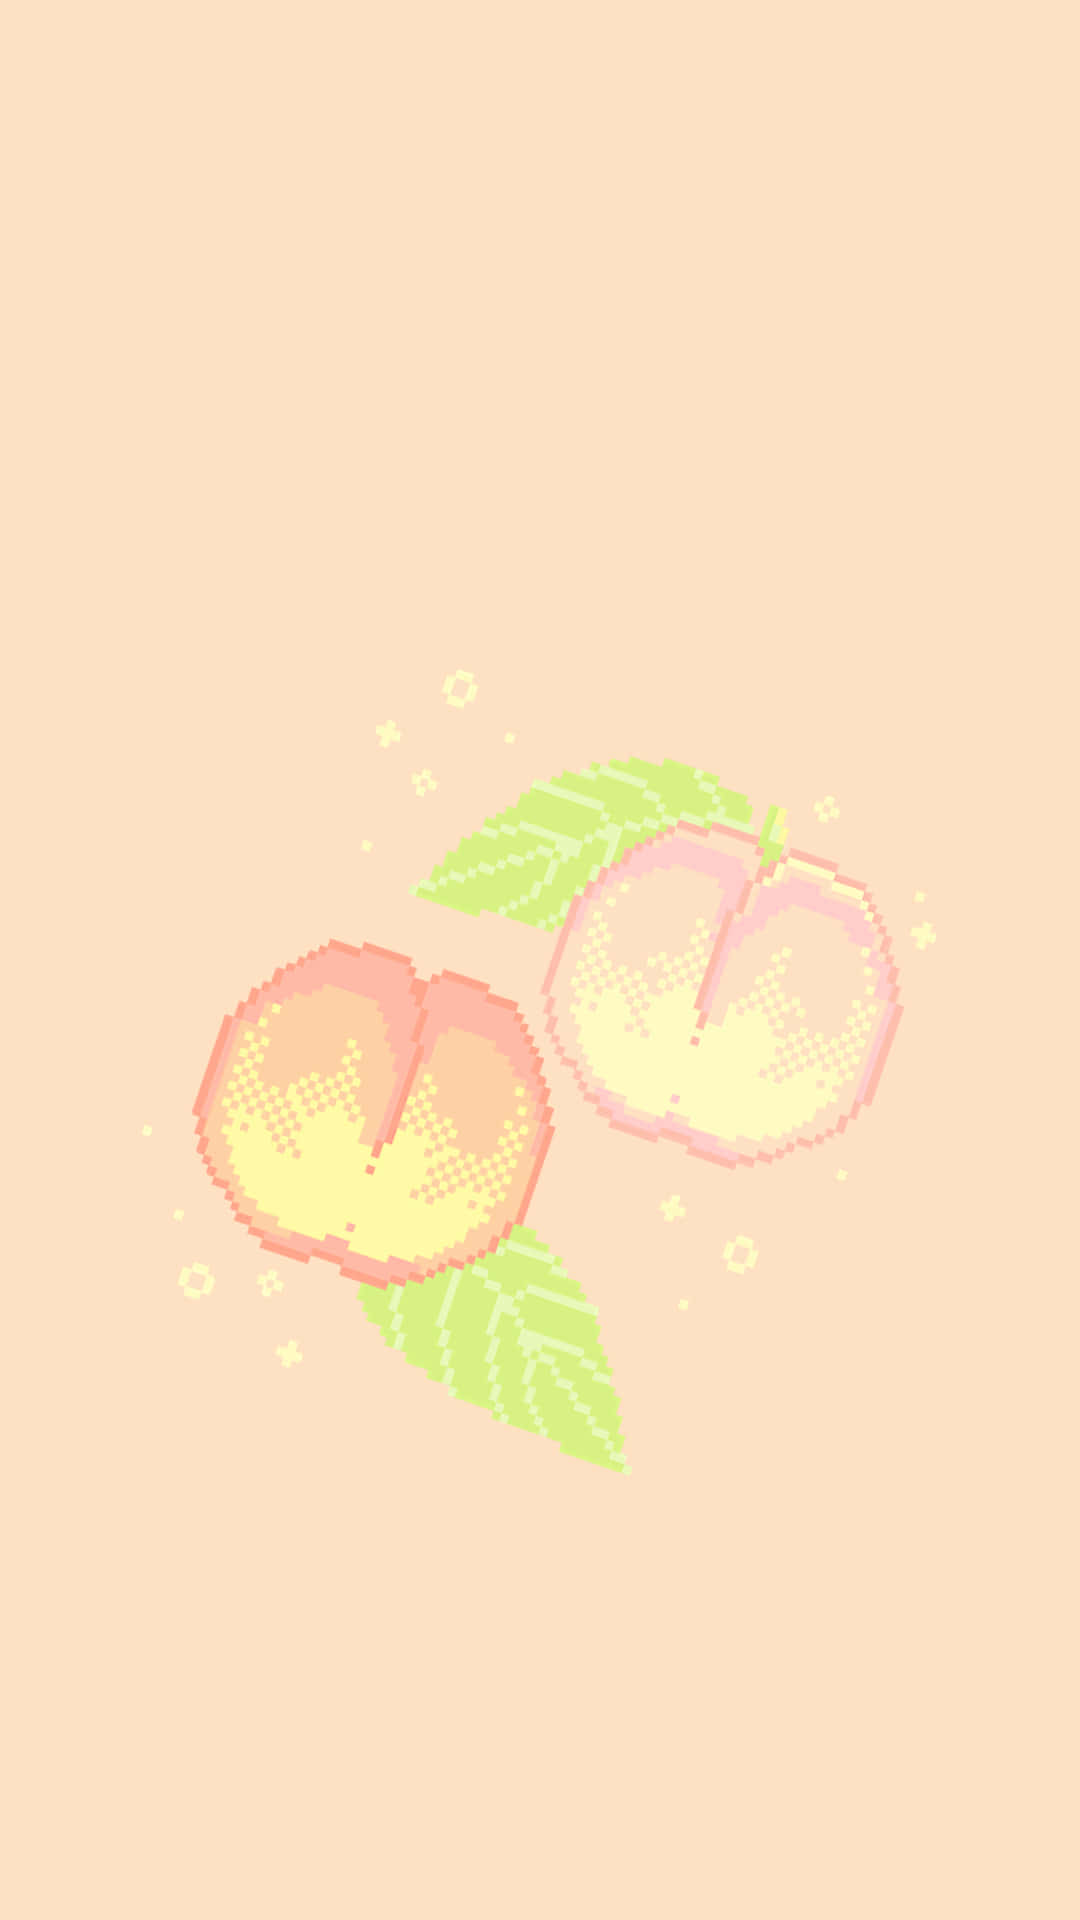 A plump, juicy peach with a sweet pink blush Wallpaper